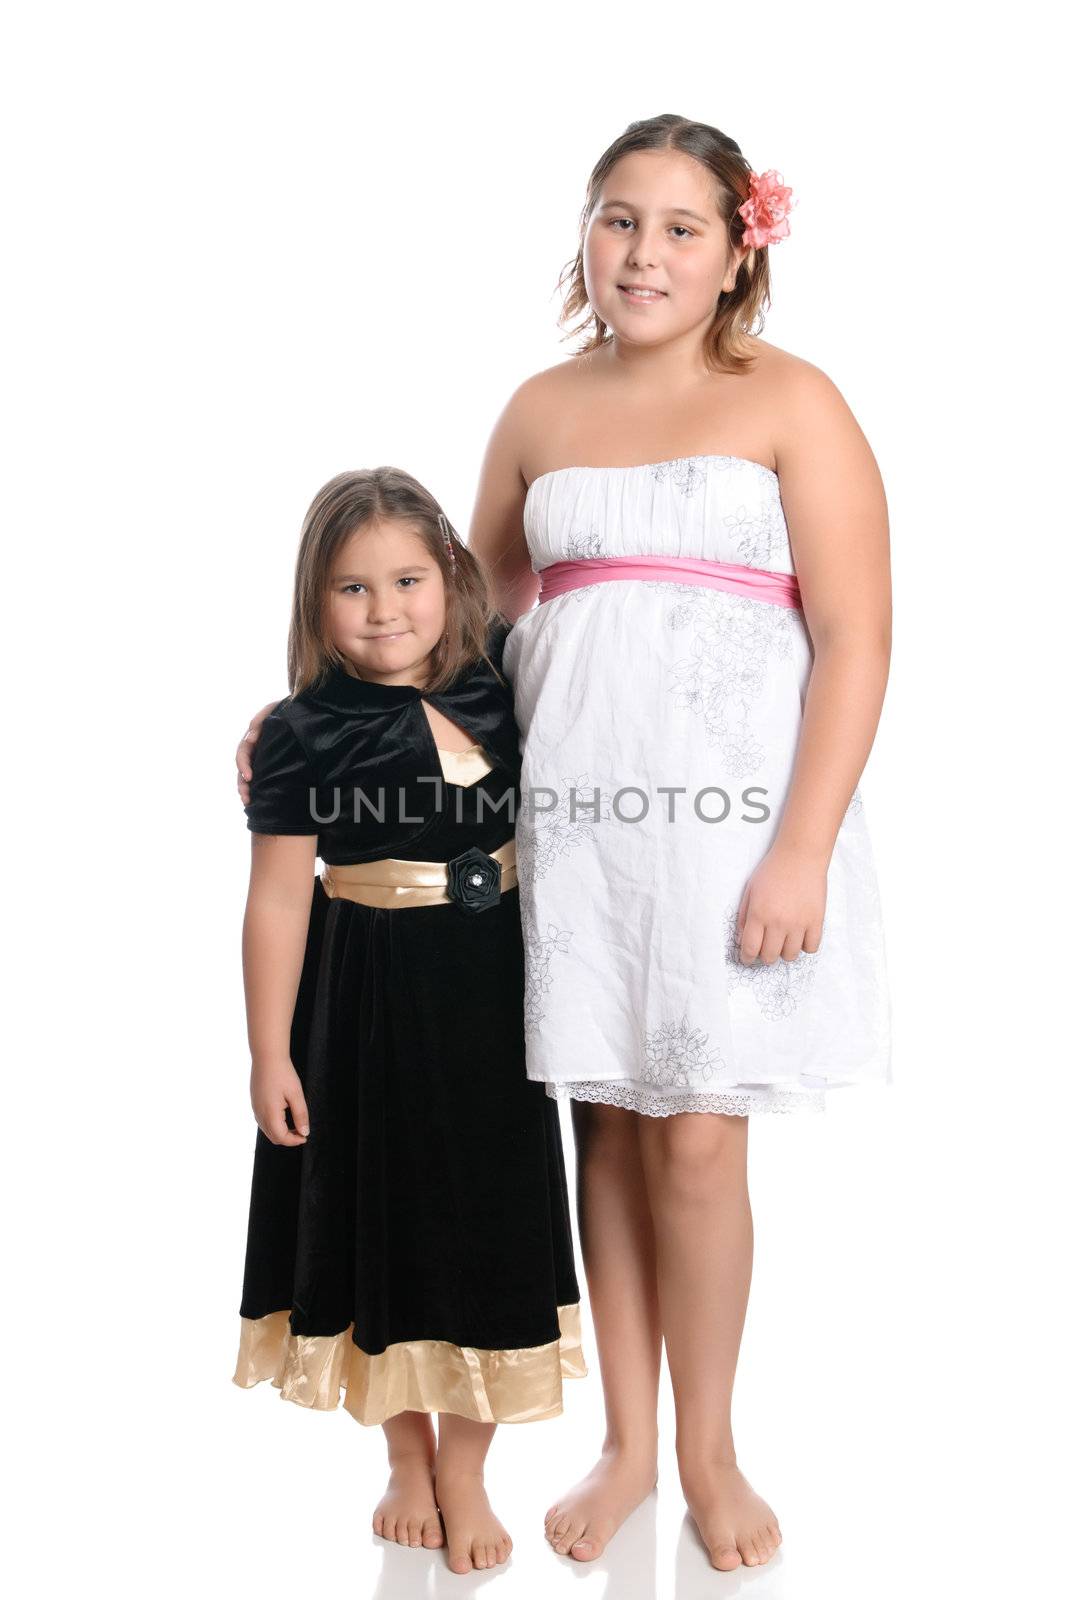 Two young sisters smiling and wearing pretty dresses are isolated on a white background.